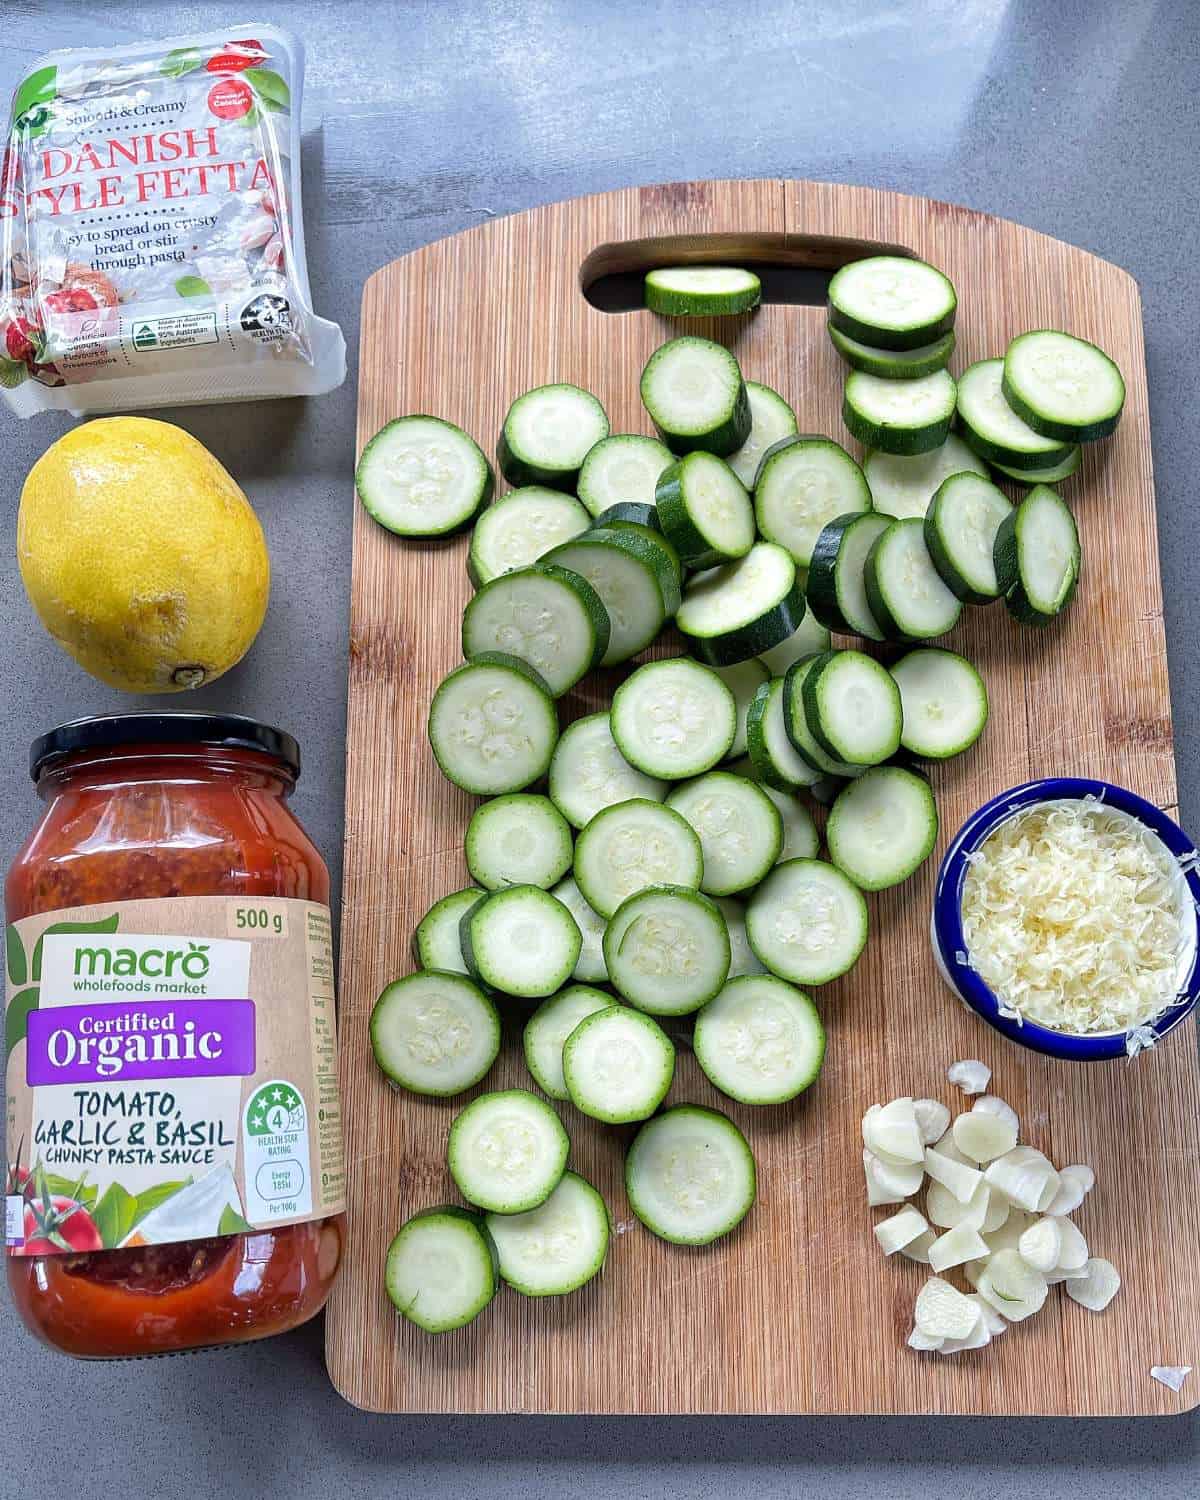 The ingredients for Zucchini and Tortellini Pasta on a wooden chopping board.